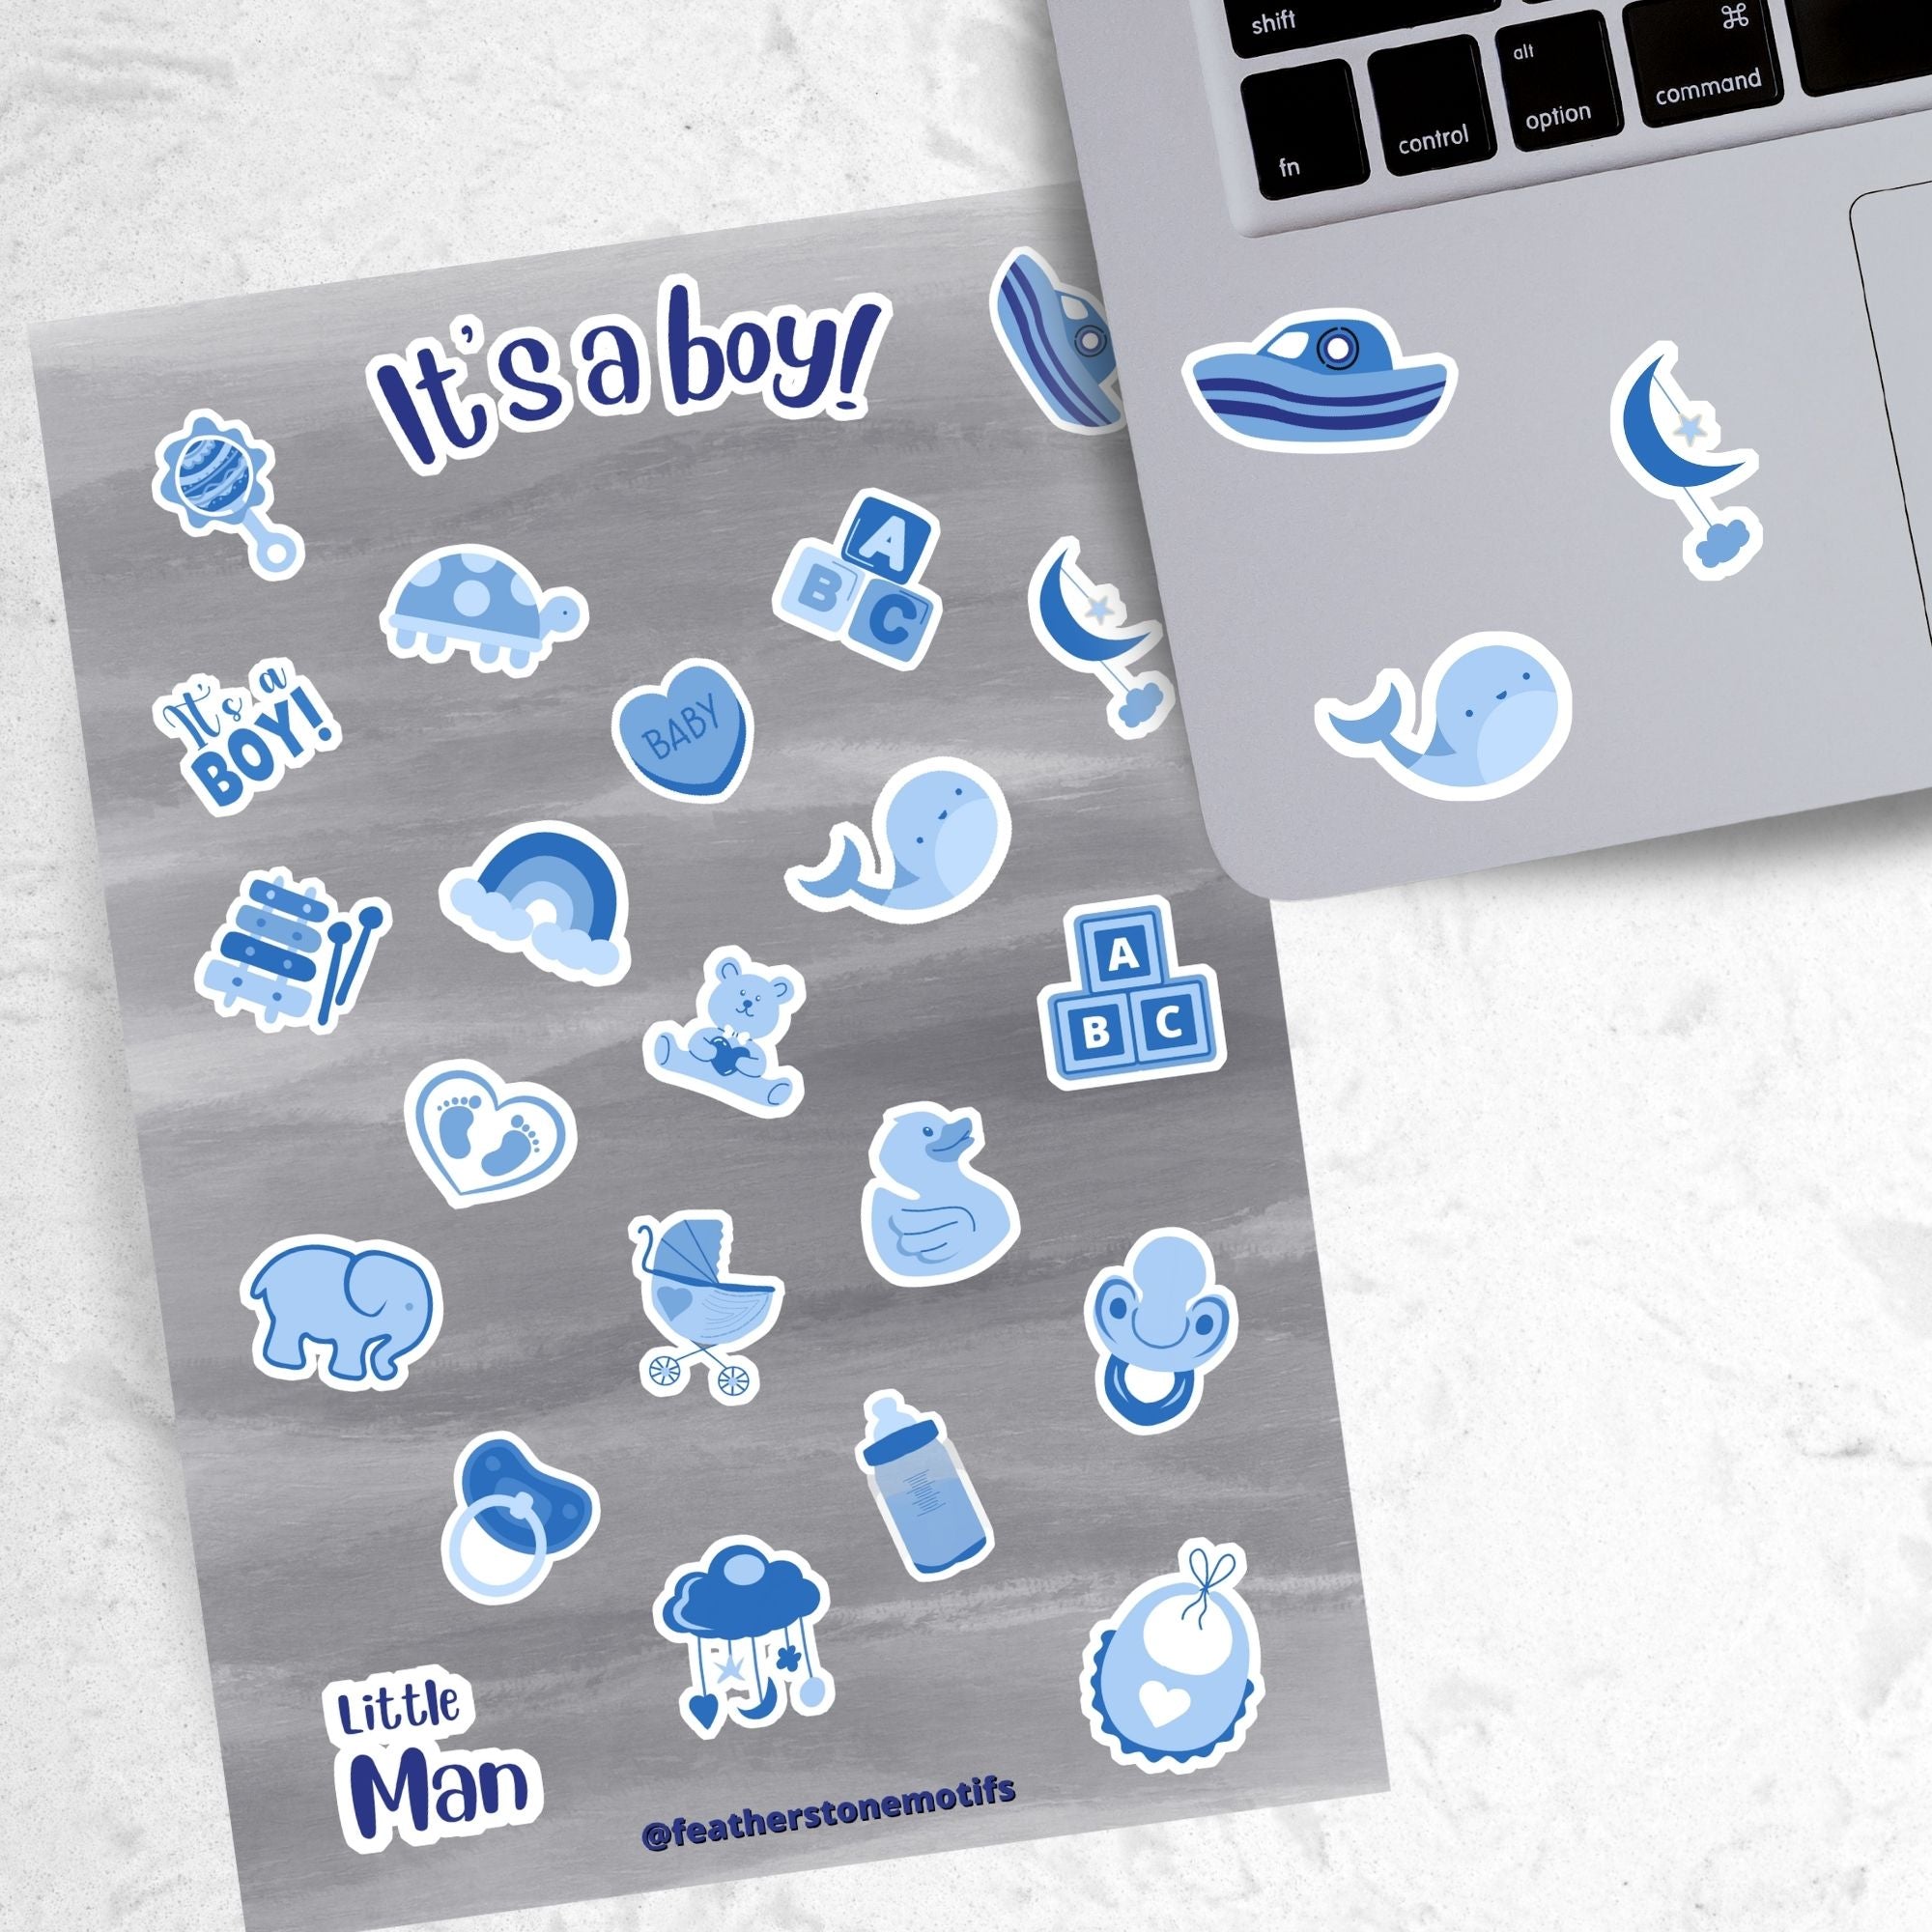 Congratulations, it's a boy! This sticker sheet is perfect for parents welcoming a baby boy into their family and it has lots of images of toys, a bottle, a stroller, and animals, all in blue on a gray background. This image shows the sticker sheet next to an open laptop with stickers of a boat, a moon and stars crib mobile, and a whale, applied below the keyboard.